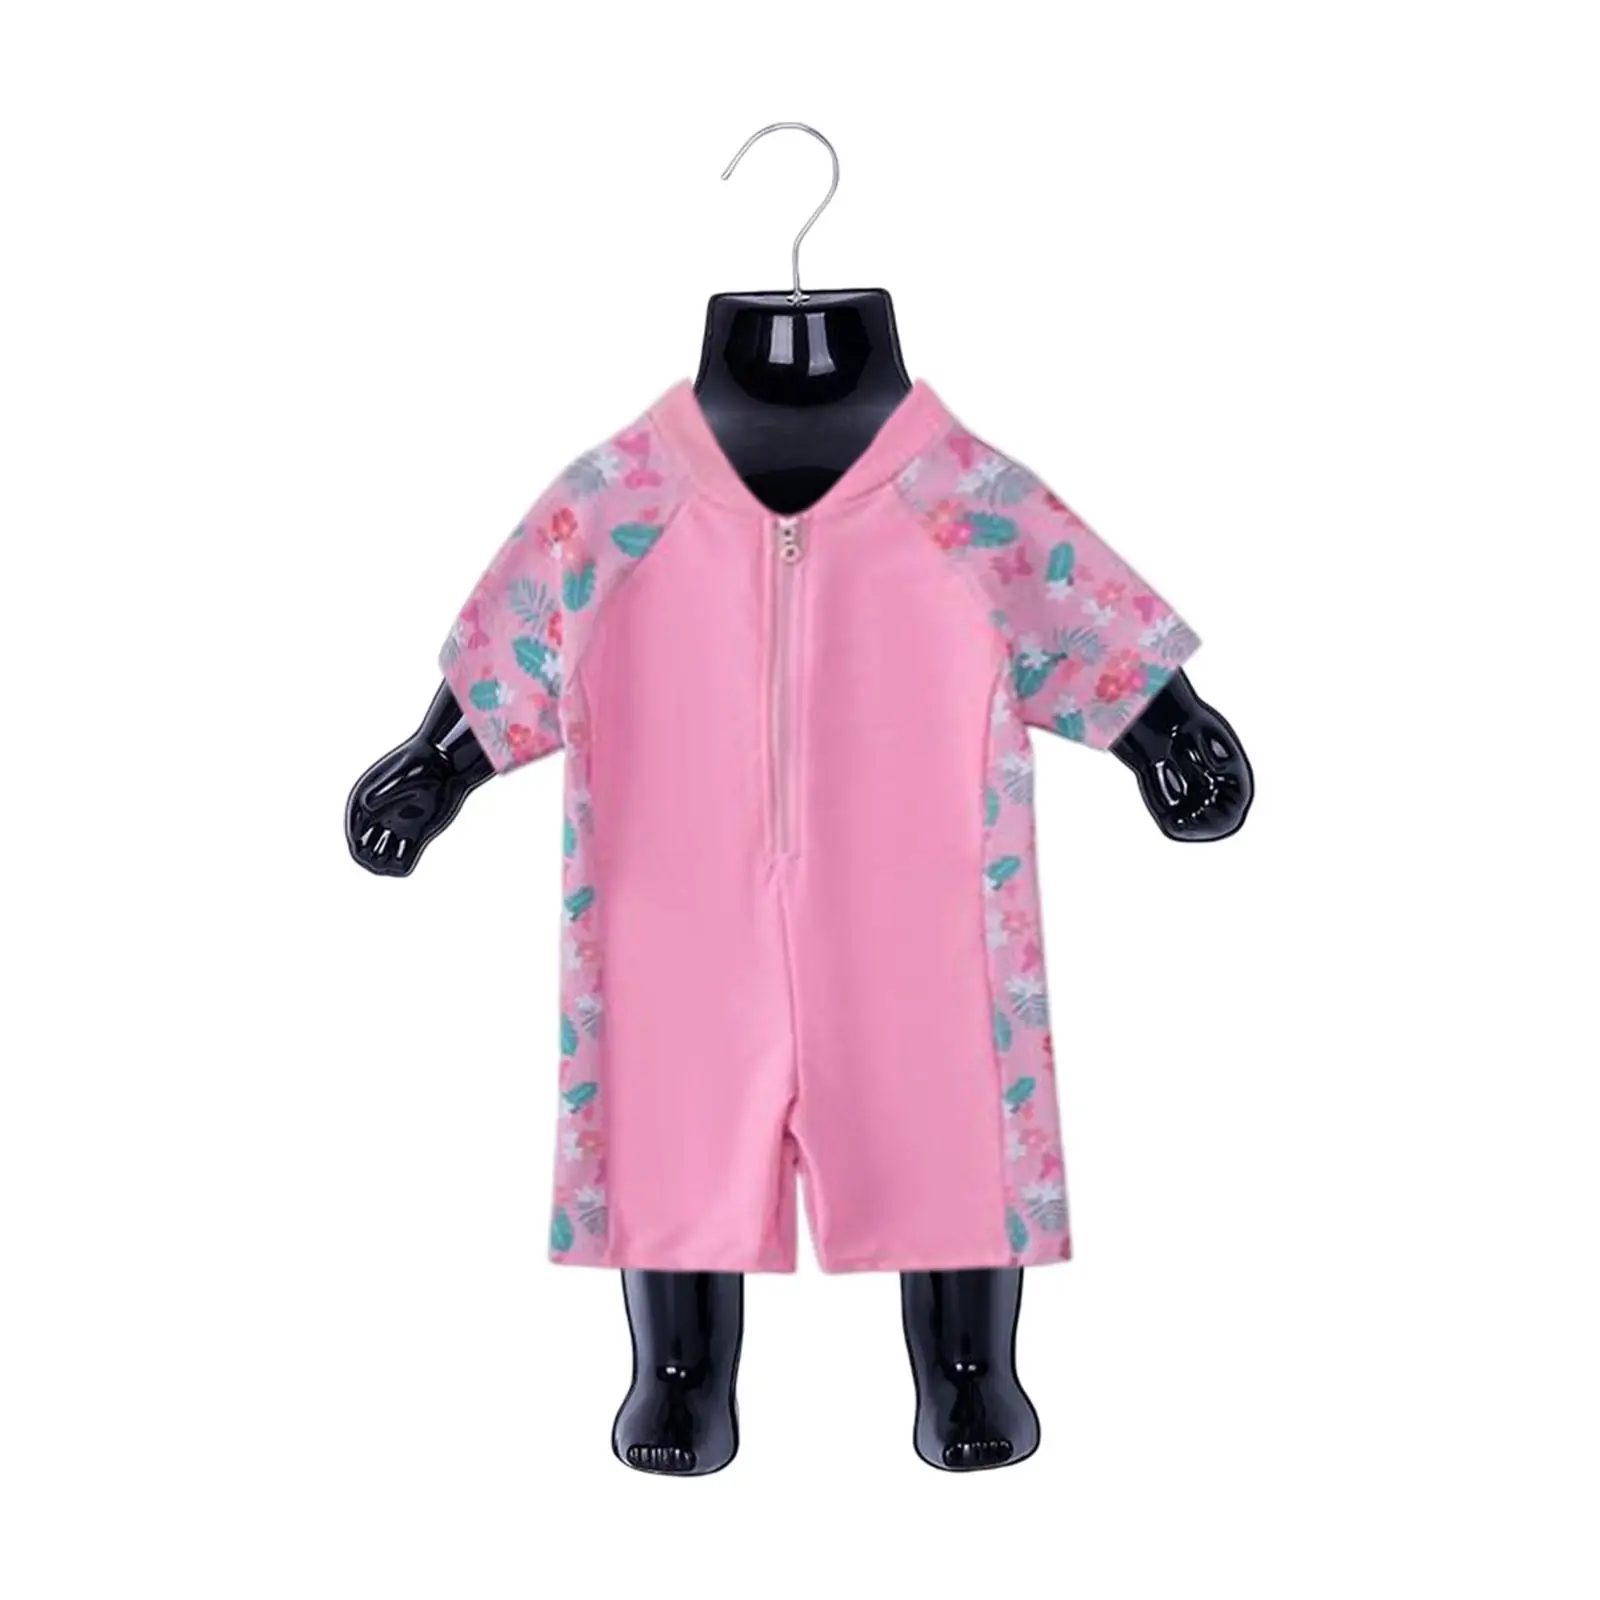 Manikin Display Realistic Clothes Display 21.65inch Height Socks Display Model with Hook Child Mannequin Dress Form for Window